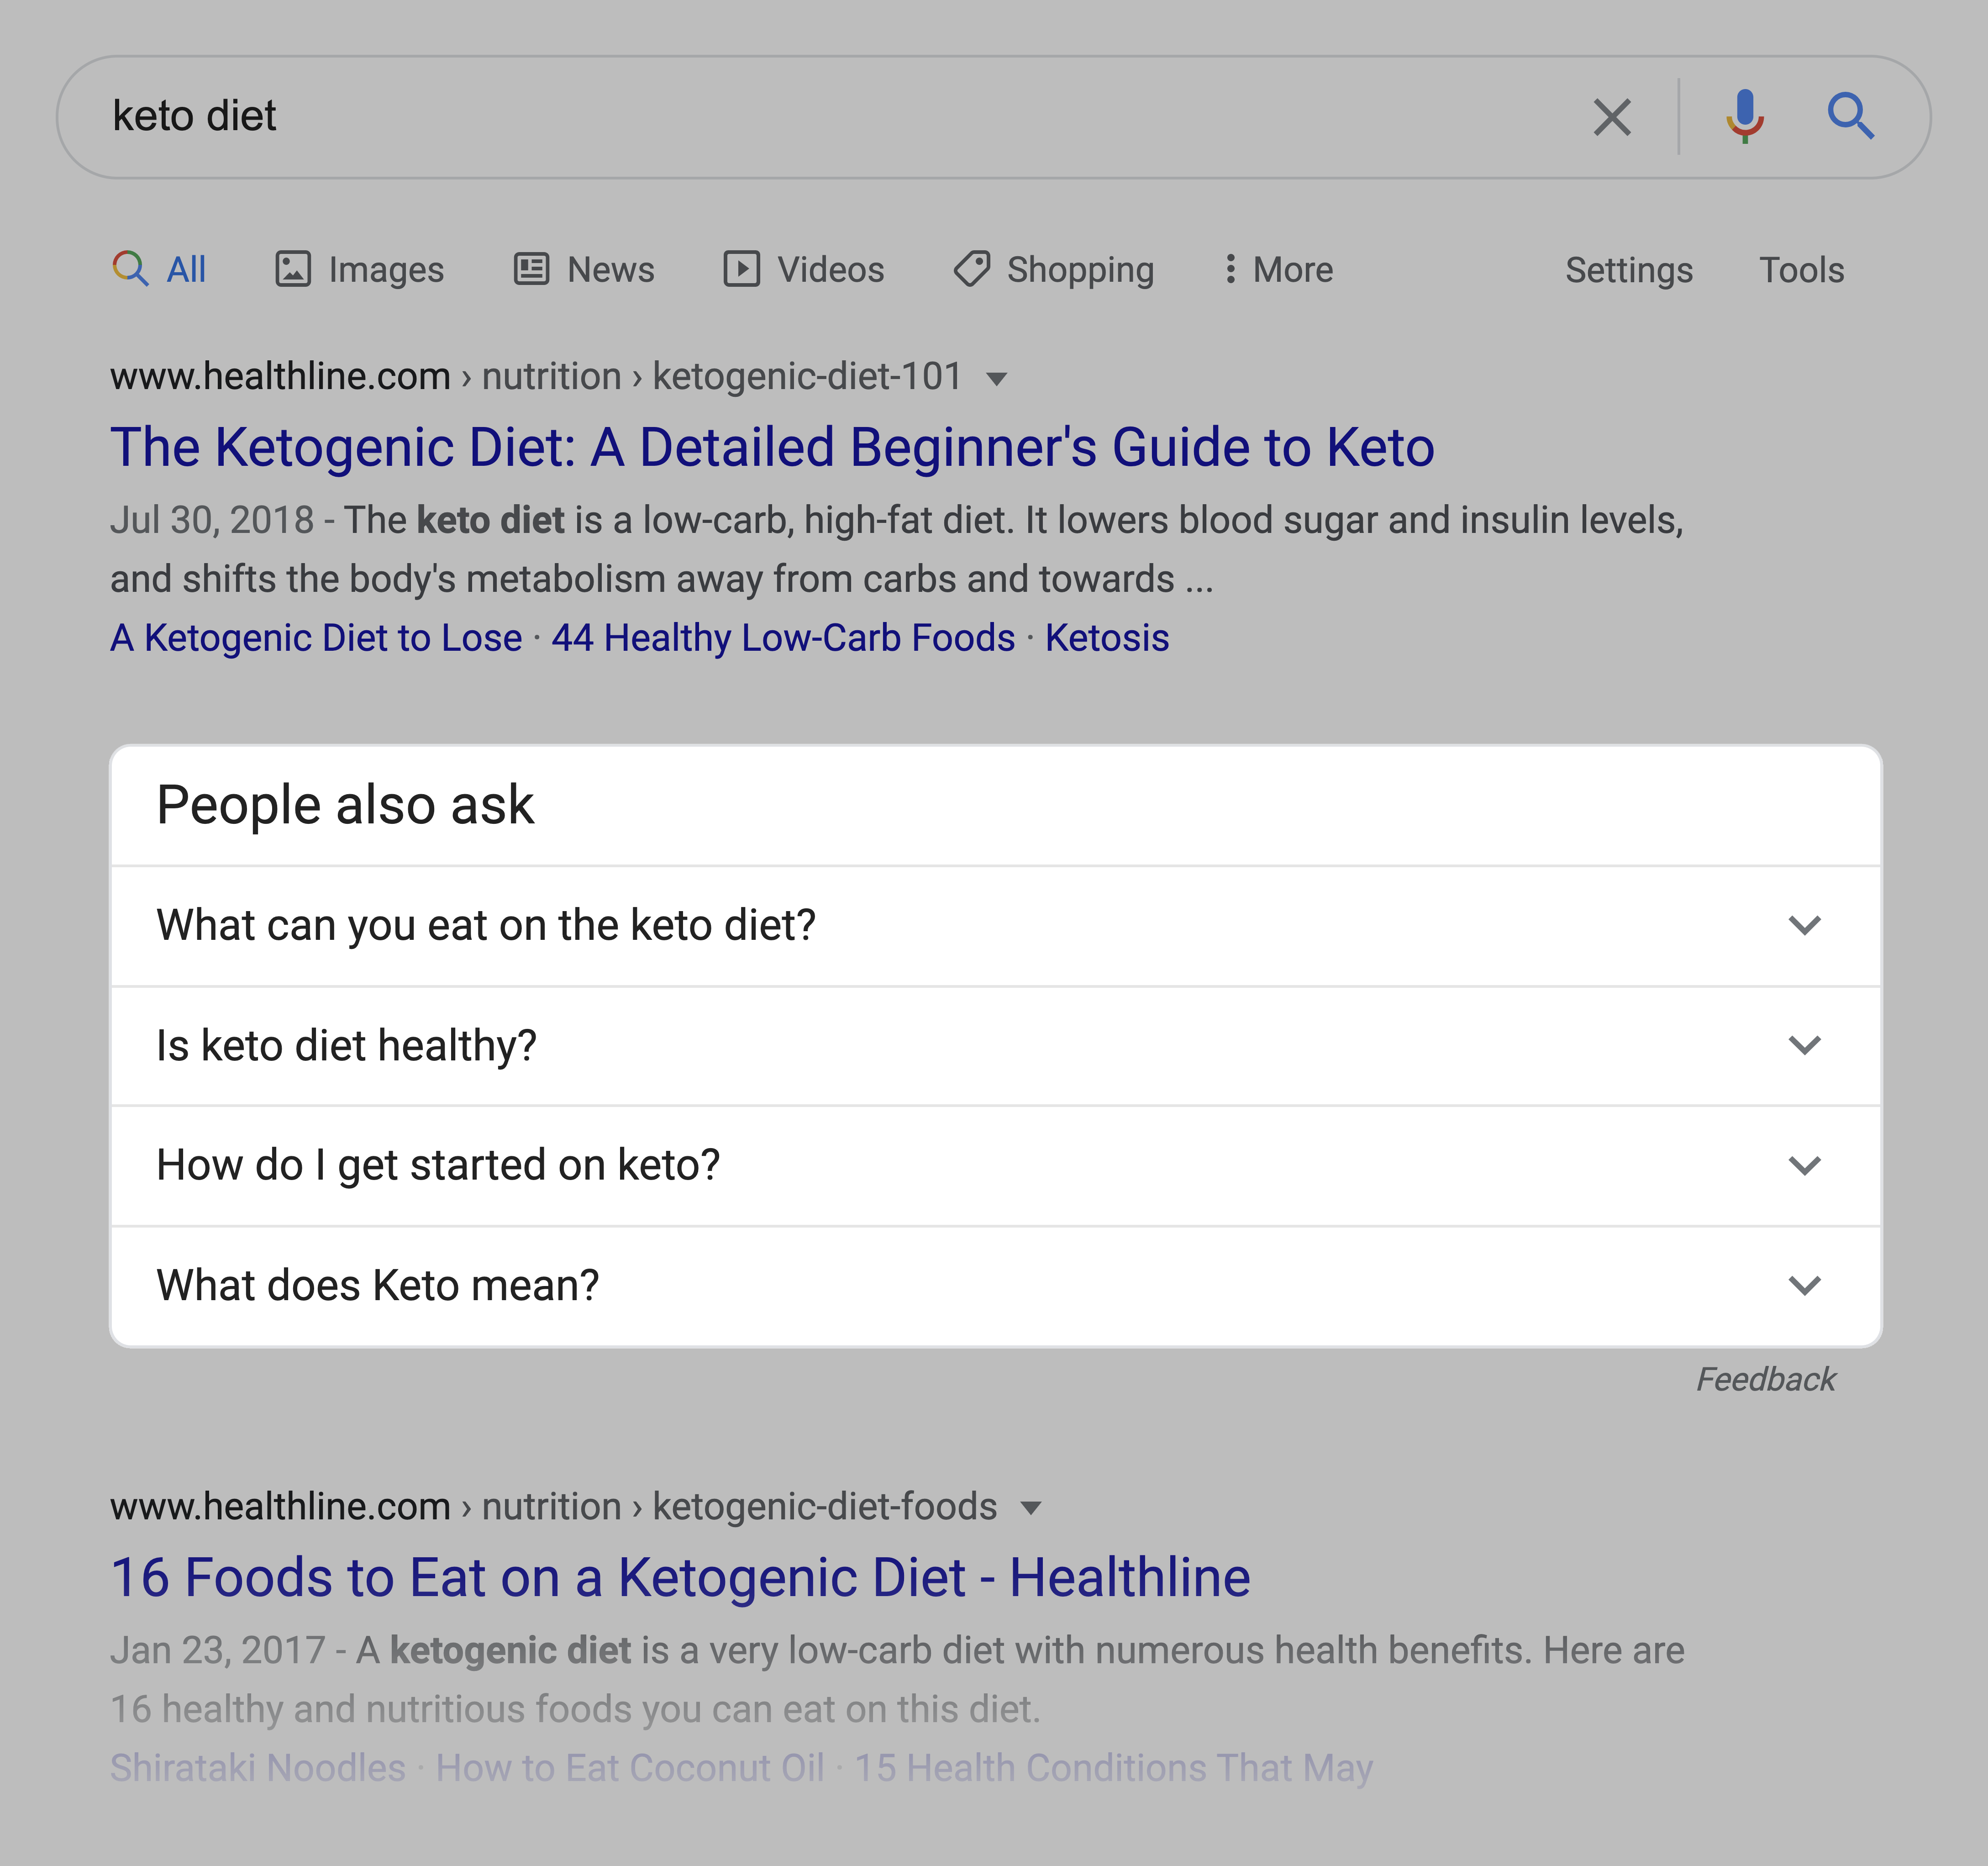 Keto diet – SERPs – People also ask